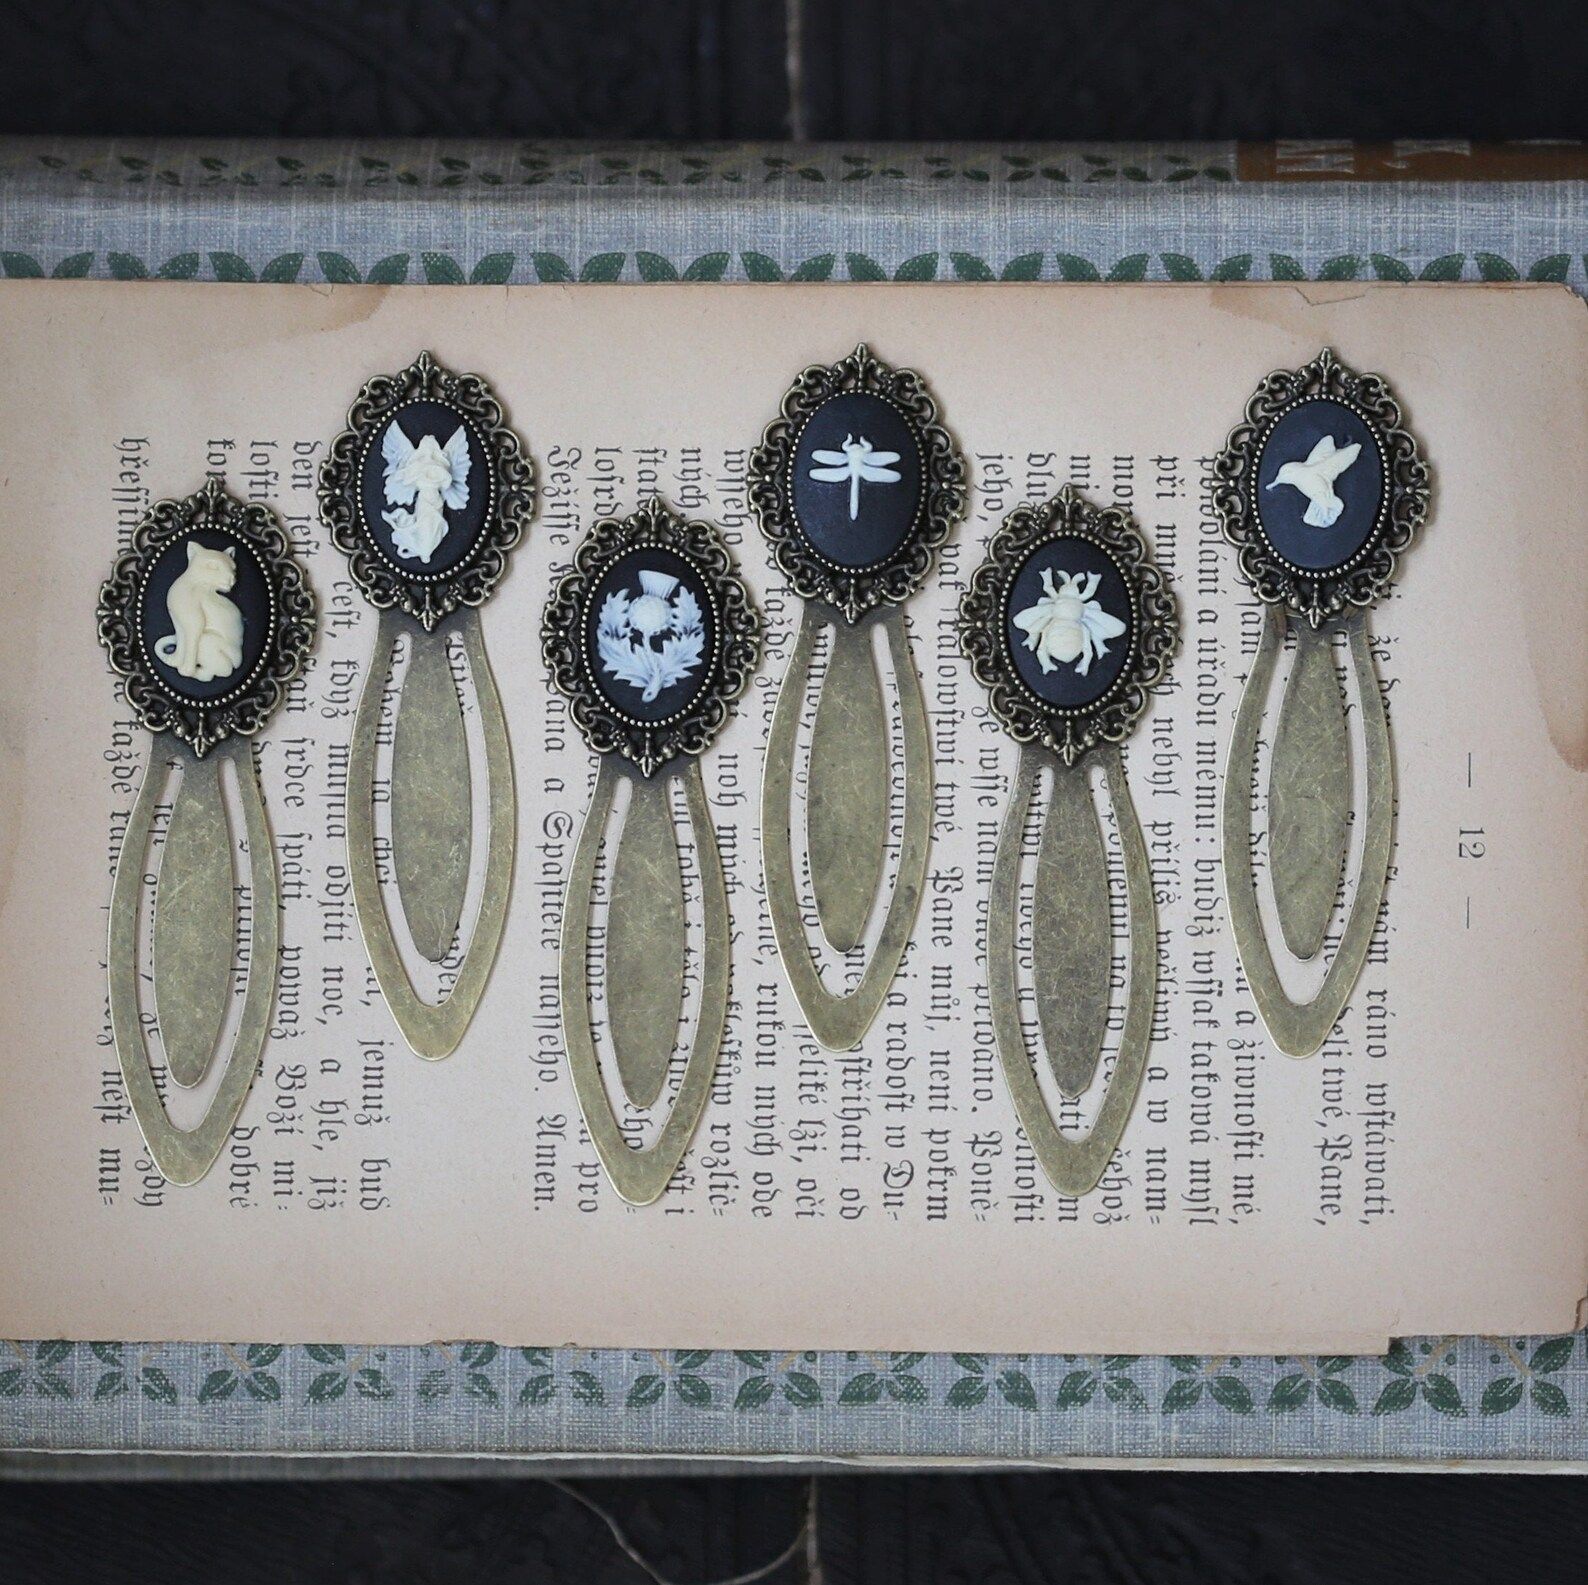 metal bookmarks with black and white cameos at the end